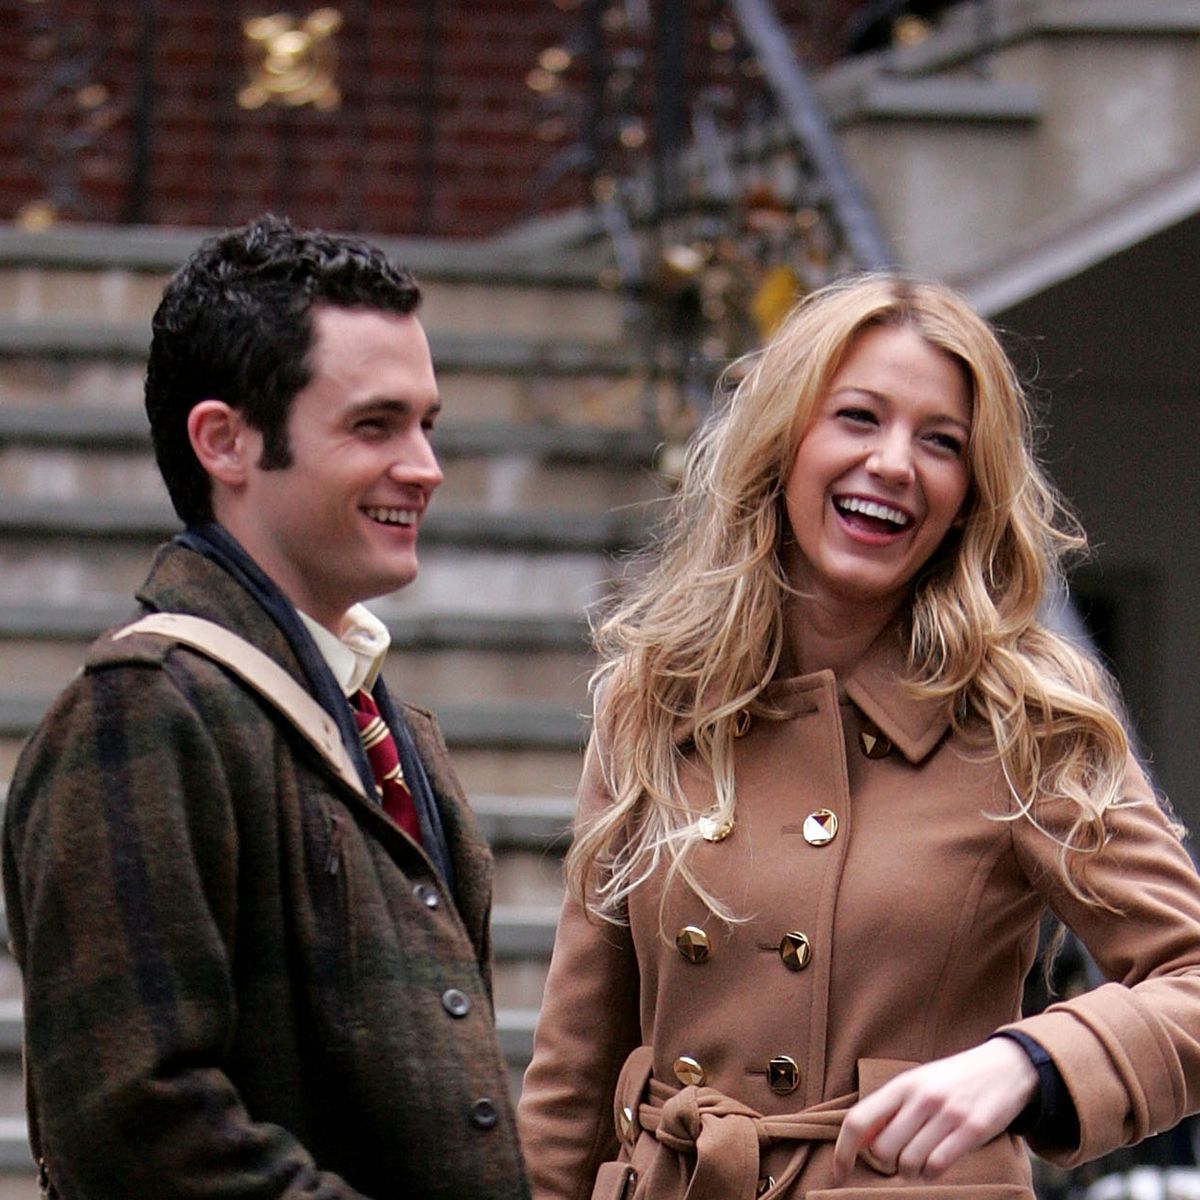 Blake Lively Calls Out Gossip Girl Ending in Hilarious Instagram